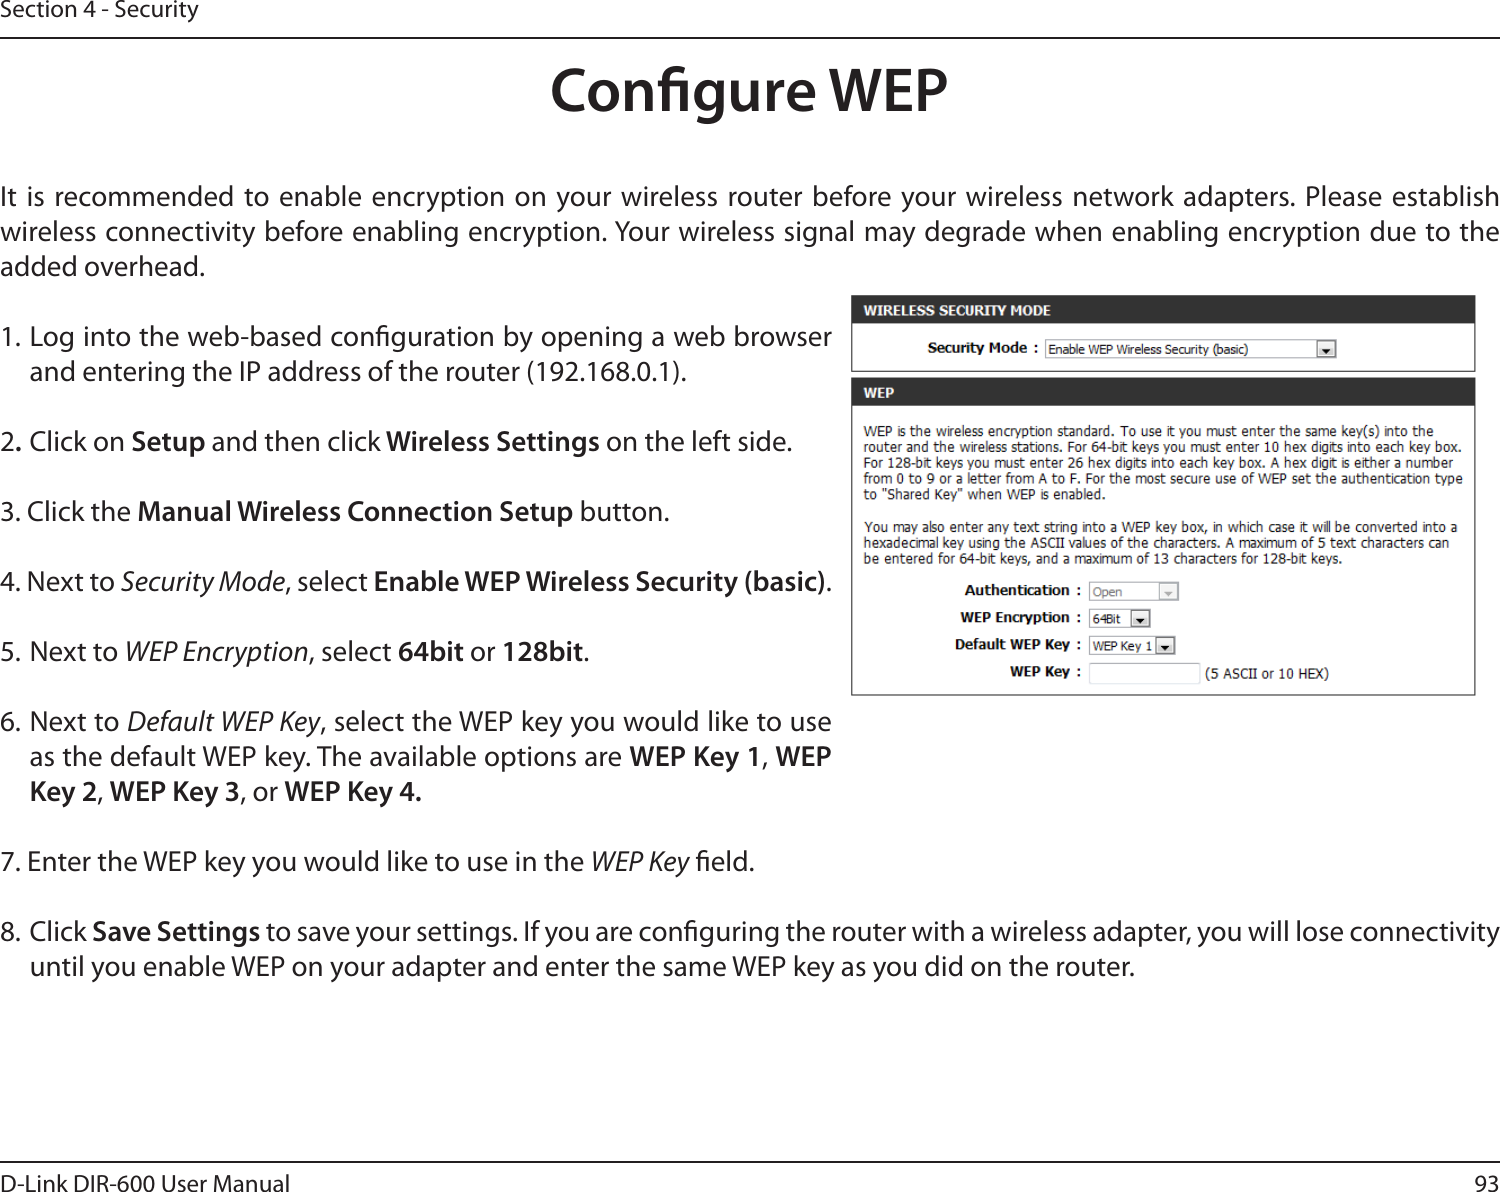 93D-Link DIR-600 User ManualSection 4 - SecurityCongure WEPIt  is recommended to enable  encryption on your wireless router before your wireless network adapters. Please establish wireless connectivity before enabling encryption. Your wireless signal may degrade when enabling encryption due to the added overhead.1. Log into the web-based conguration by opening a web browser and entering the IP address of the router (192.168.0.1).  2. Click on Setup and then click Wireless Settings on the left side.3. Click the Manual Wireless Connection Setup button. 4. Next to Security Mode, select Enable WEP Wireless Security (basic).5. Next to WEP Encryption, select 64bit or 128bit.6. Next to Default WEP Key, select the WEP key you would like to use as the default WEP key. The available options are WEP Key 1, WEP Key 2, WEP Key 3, or WEP Key 4.7. Enter the WEP key you would like to use in the WEP Key eld.8. Click Save Settings to save your settings. If you are conguring the router with a wireless adapter, you will lose connectivity until you enable WEP on your adapter and enter the same WEP key as you did on the router.